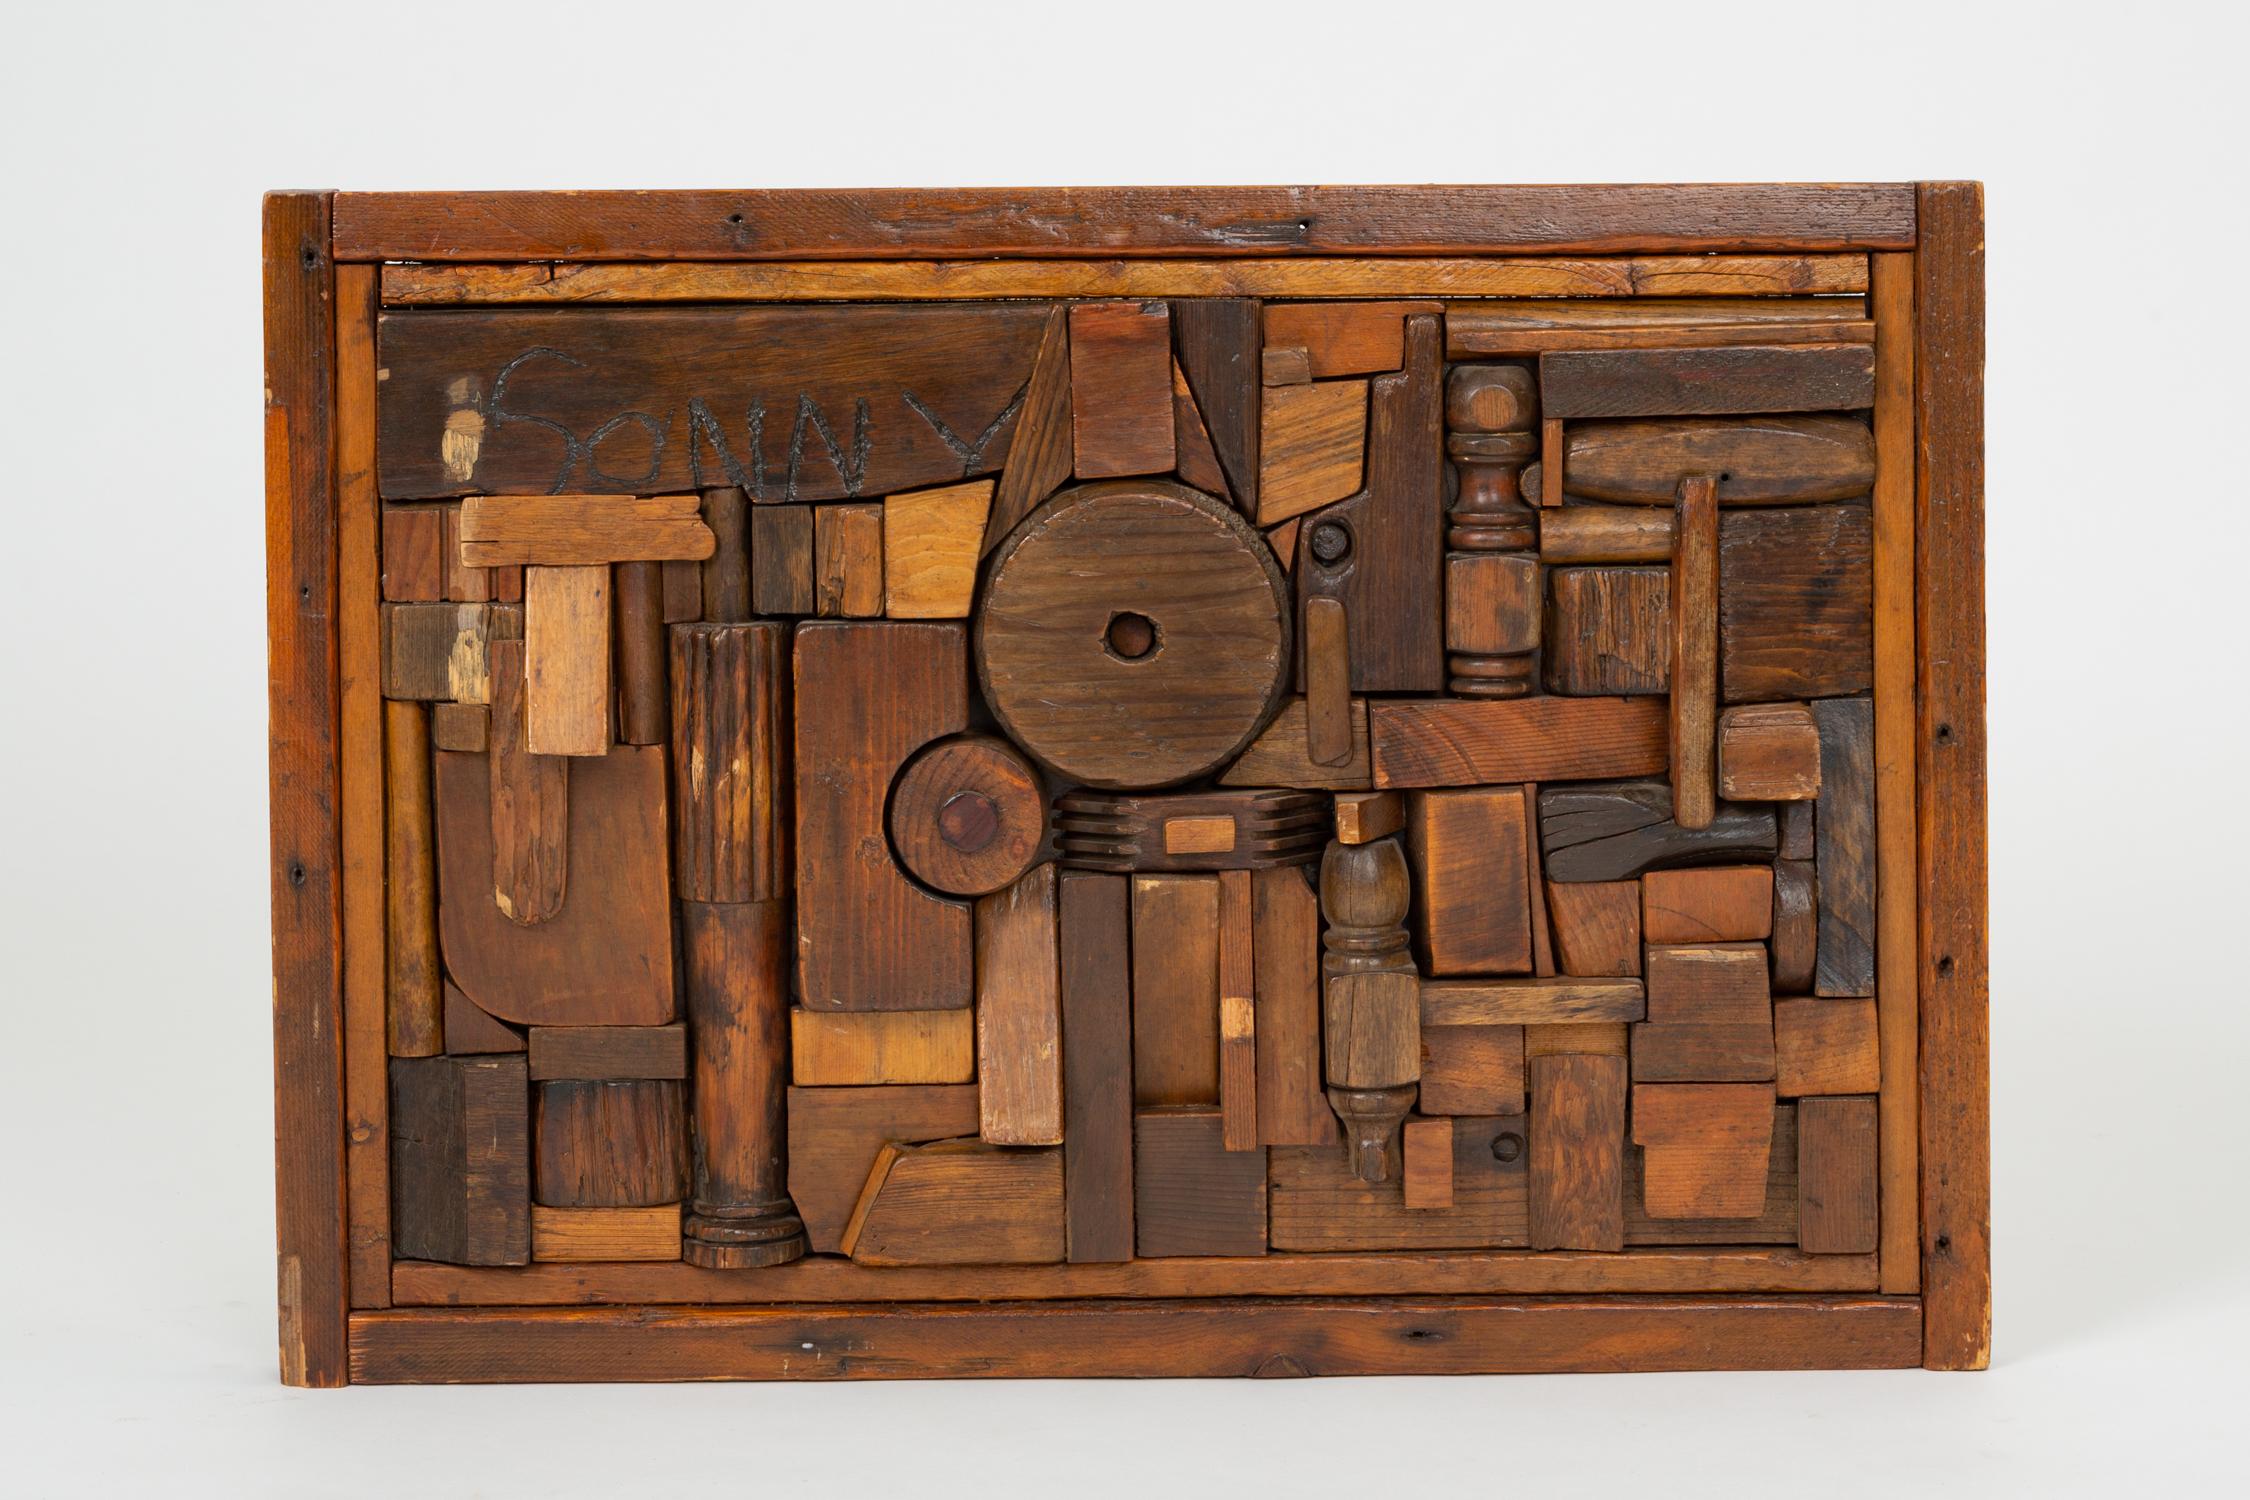 A noted artist and gallerist from Erie, PA, Francis Schanz created this wooden assemblage in the tradition of Louise Nevelson and Mabel Hutchinson as part of his graduate work. Listed in the book, “Francis T. Schanz: The Heart of Art” by Bob Nagle,